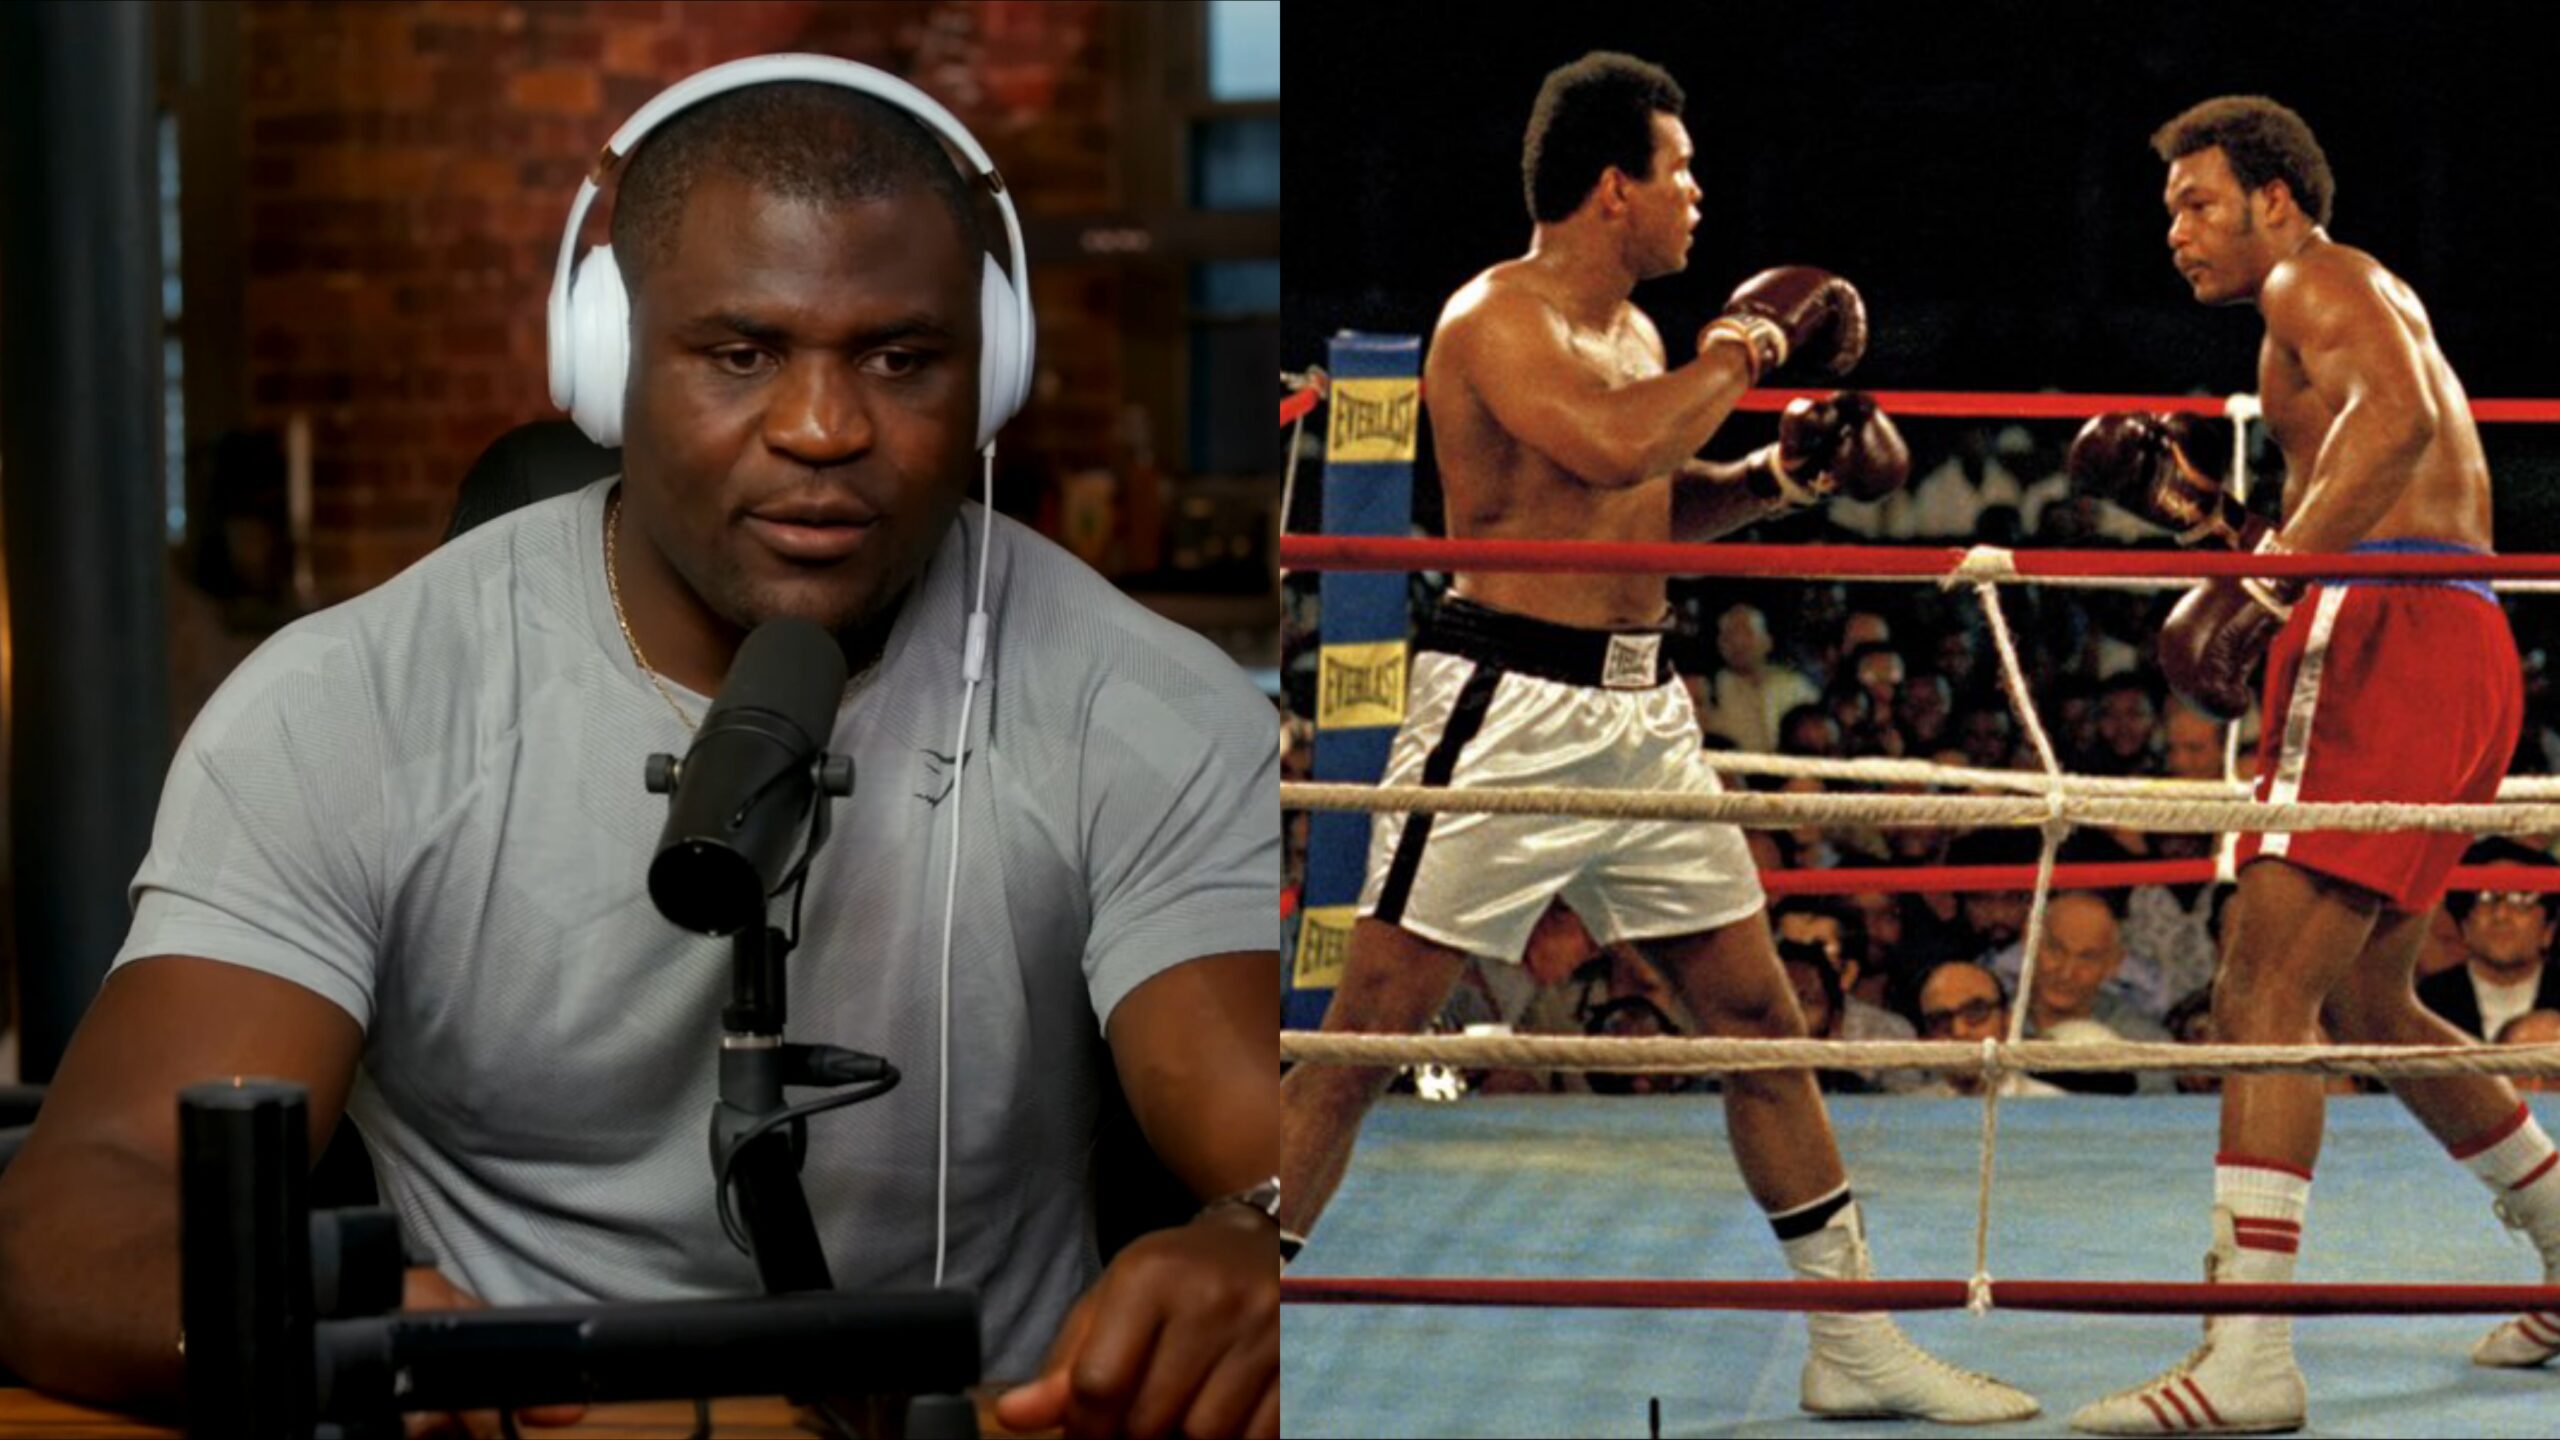 Francis Ngannou comments on 'Rumble in the Jungle' between Muhammad Ali and George Foreman